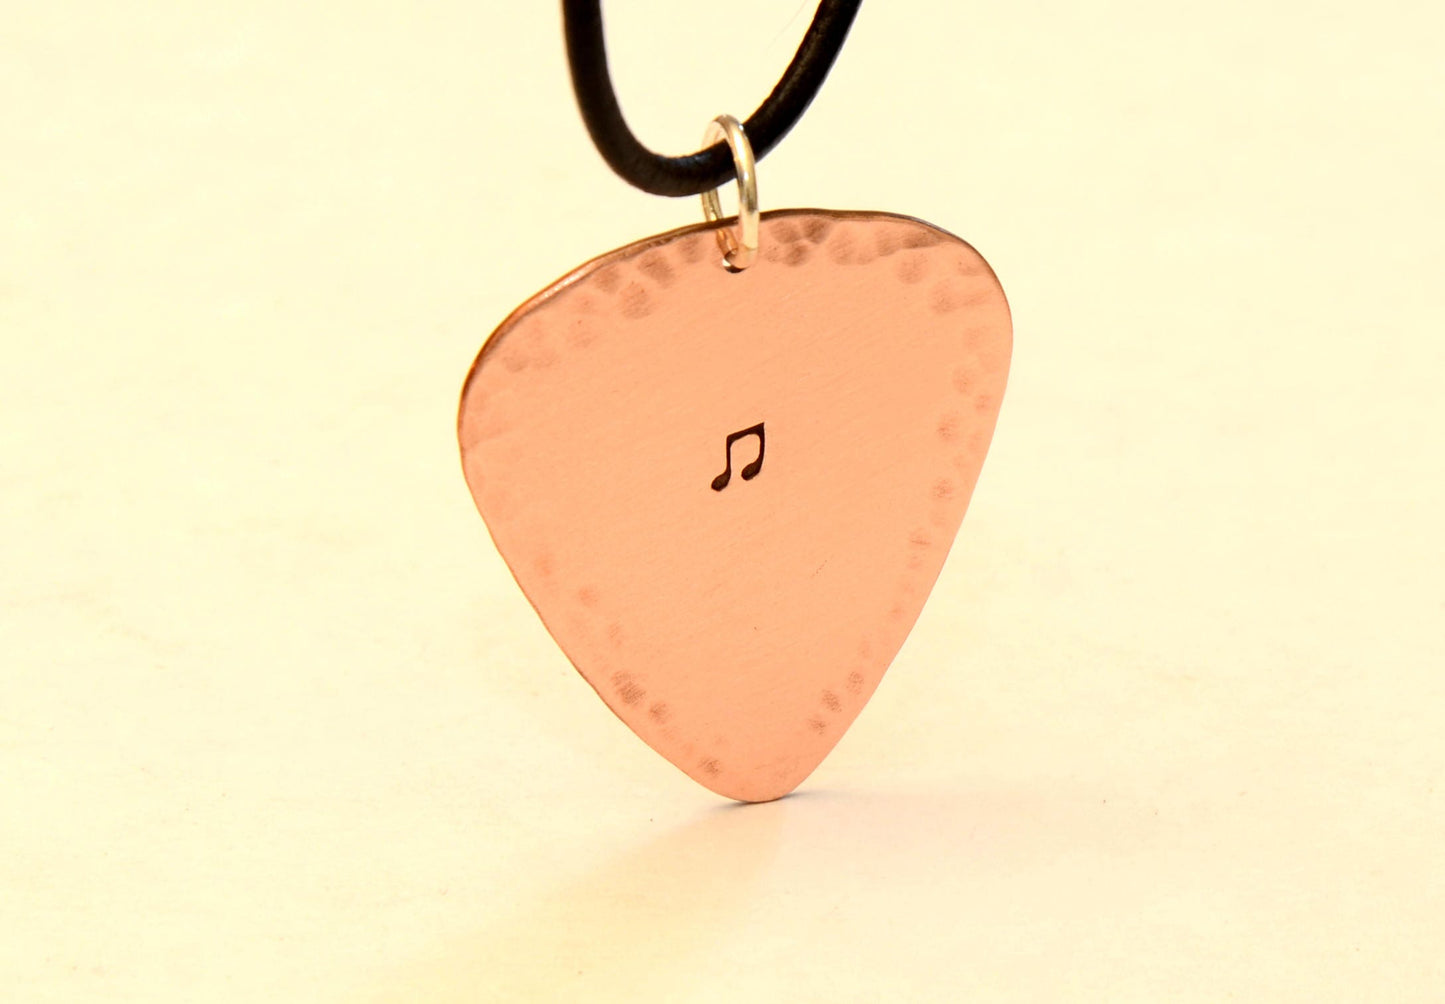 Hammered Copper Guitar Pick Necklace with Music Note